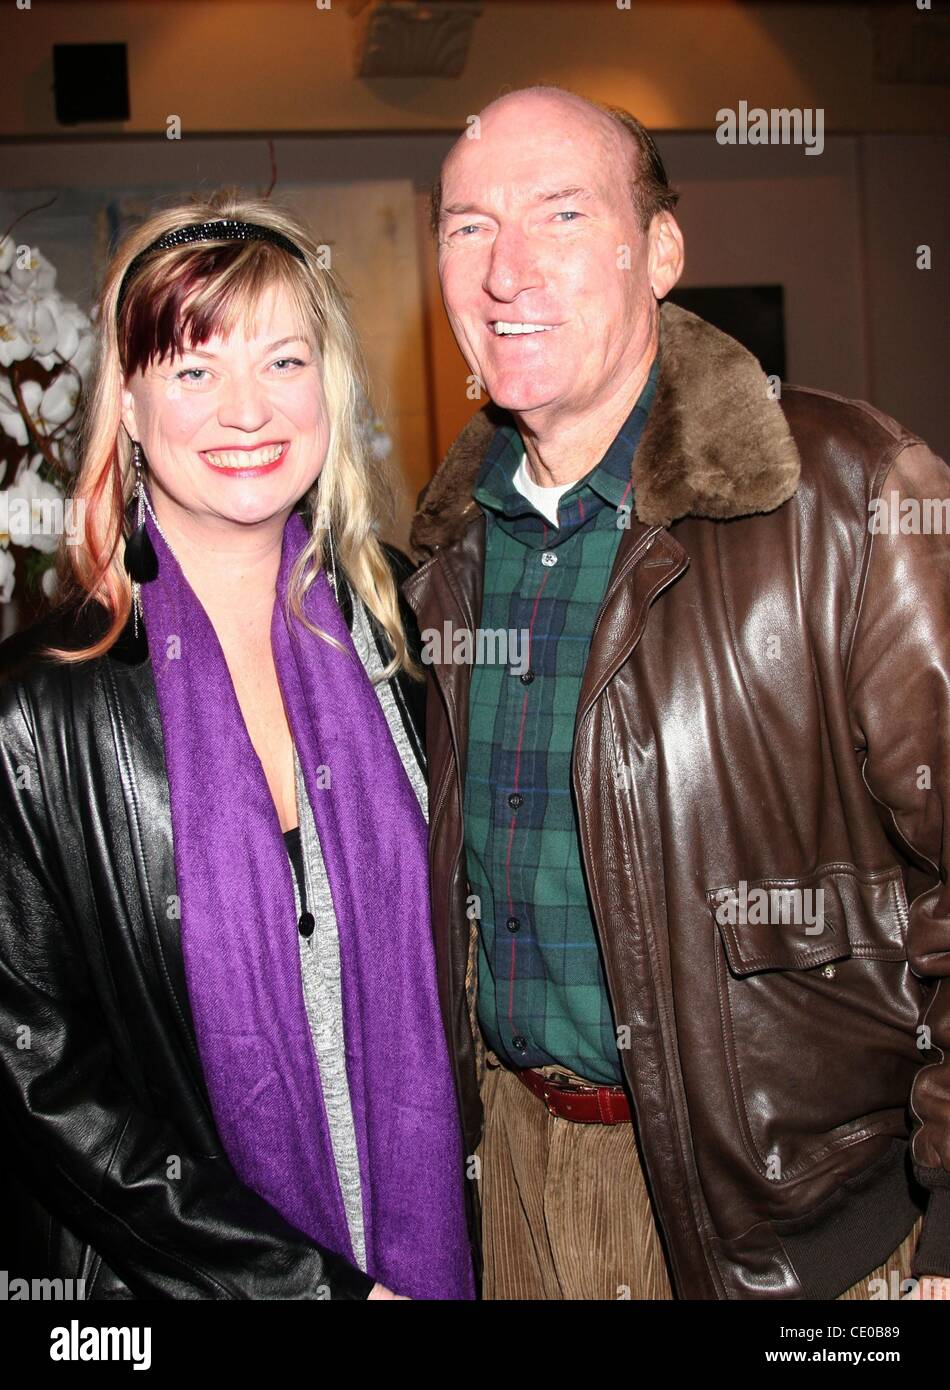 Nov 05, 2011 - Los Angeles, California, USA - Actor ED LAUTER and wife VERA at the 'A Sentimental Journey' Los Angeles Premiere  (Credit Image: © Jeff Frank/ZUMAPRESS.com) Stock Photo